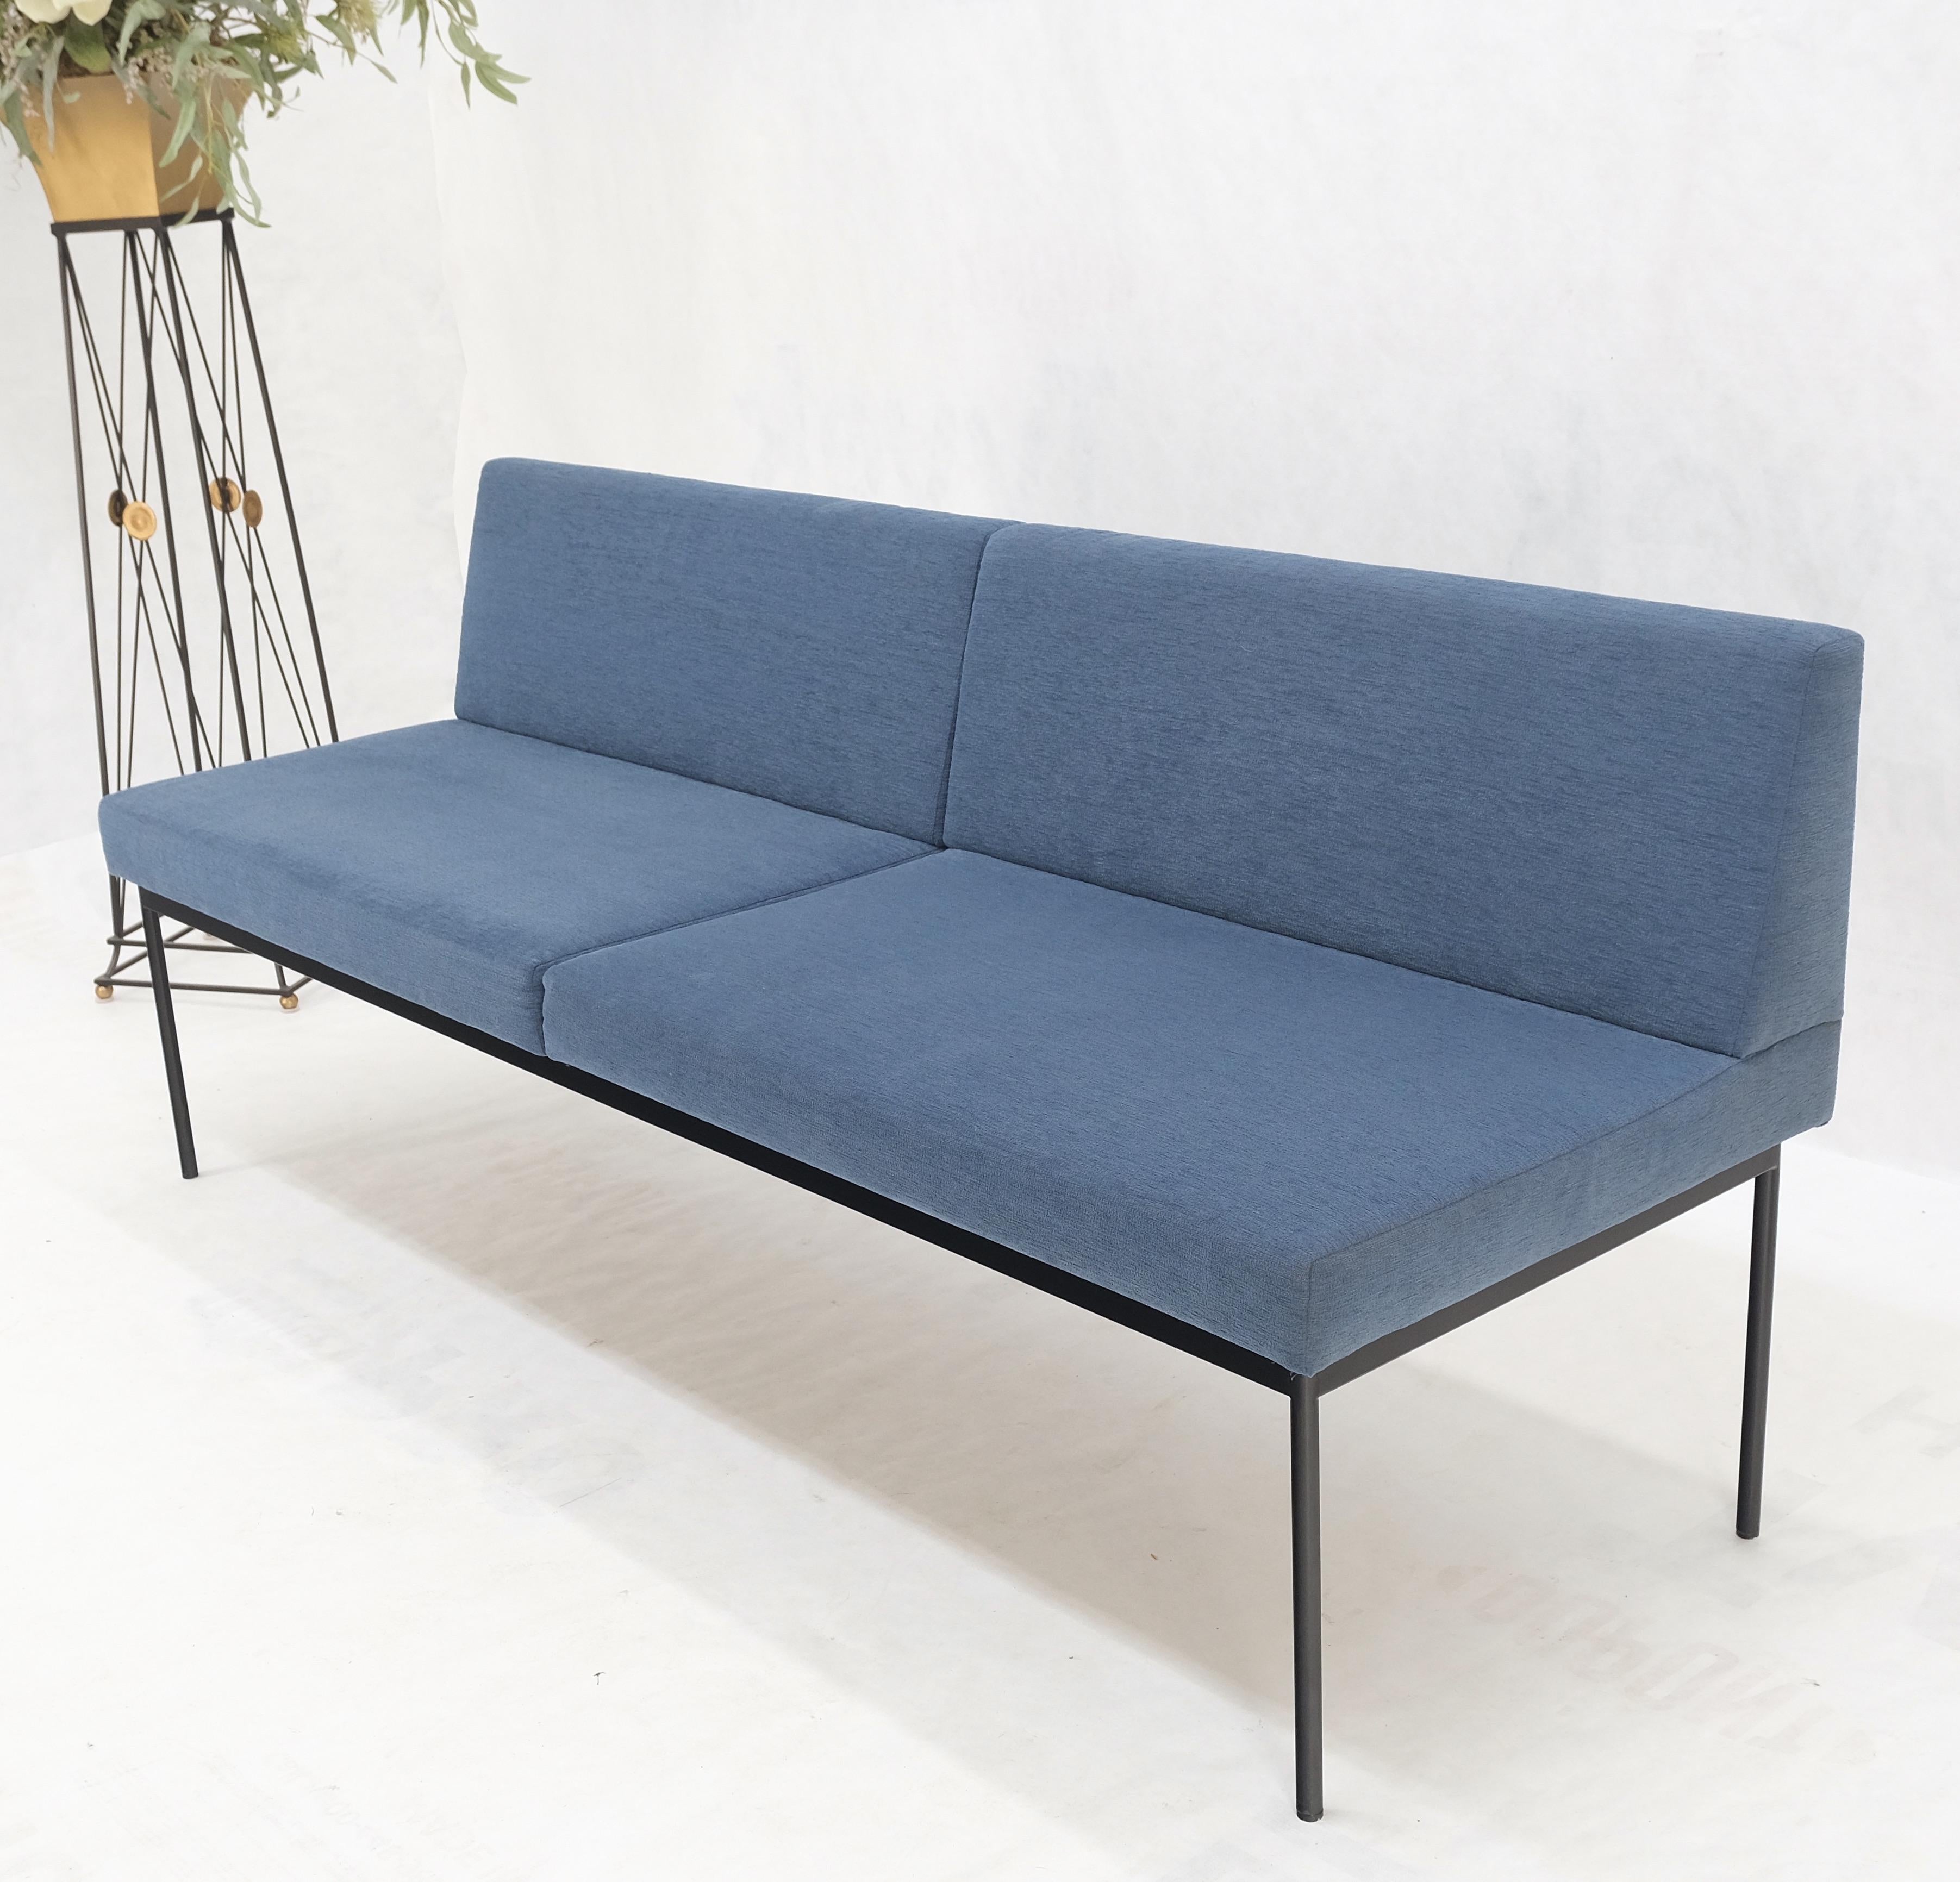 Geiger Tuxido Lounge Sofa Couch Bench Seating Blue Upholstery Black Frame Mint For Sale 2